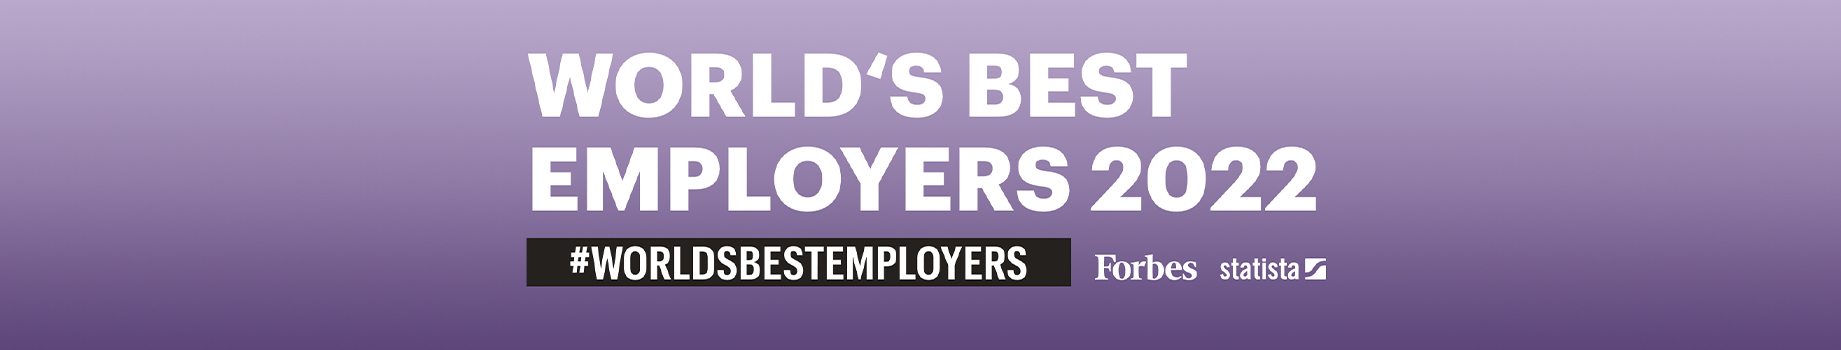 GA_WORLDS_BEST_EMPLOYERS_SITE_GA_ 1841x350px.png